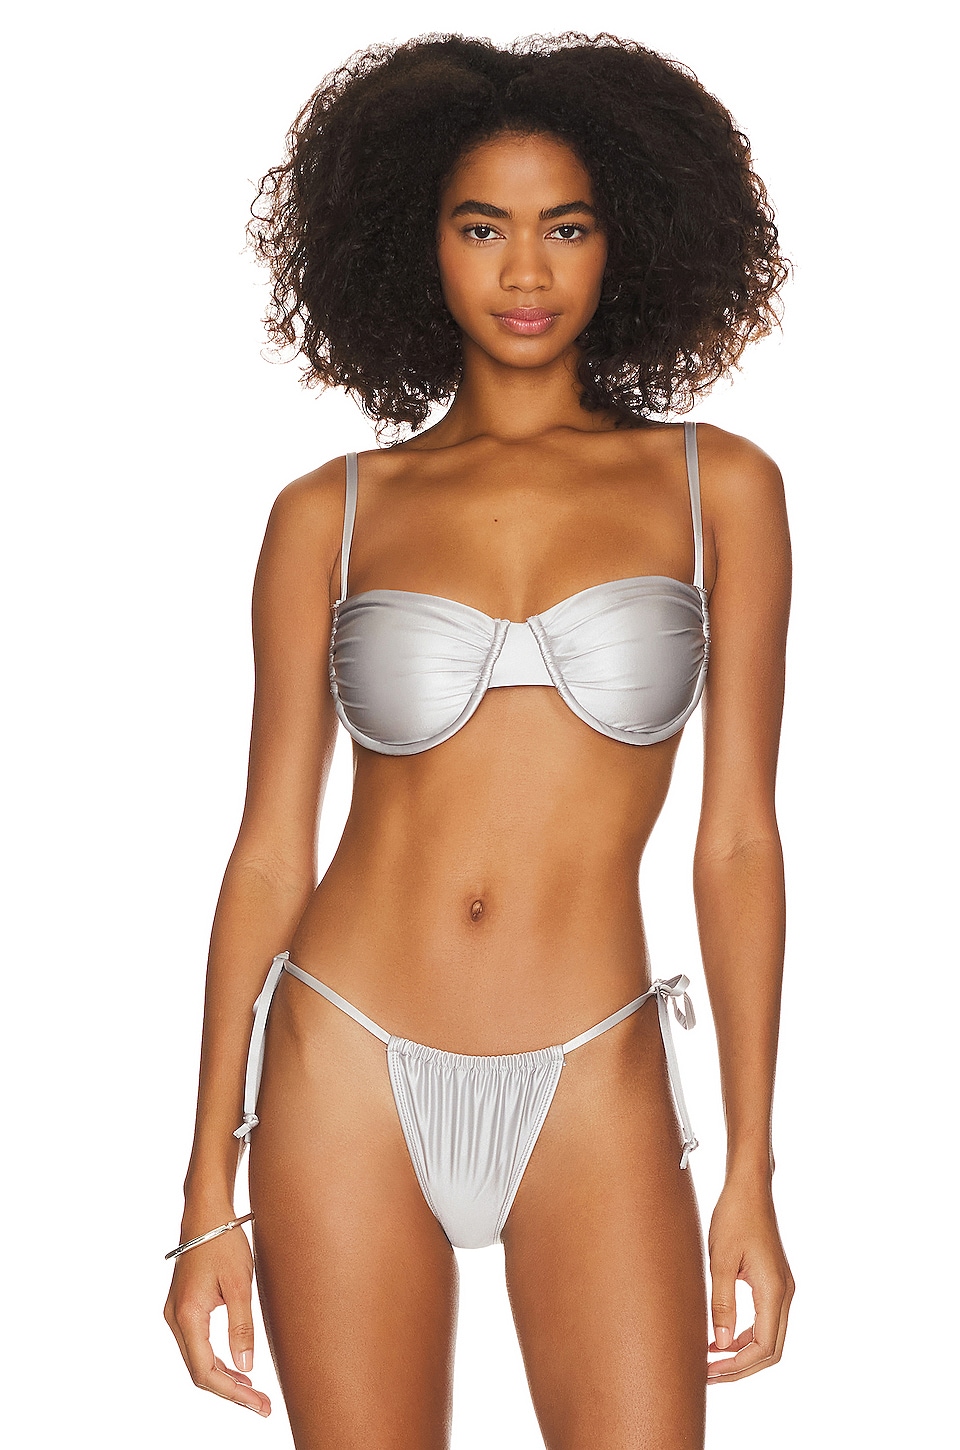 CUUP Is Taking Its Size-Inclusive Lingerie Magic to Swimwear